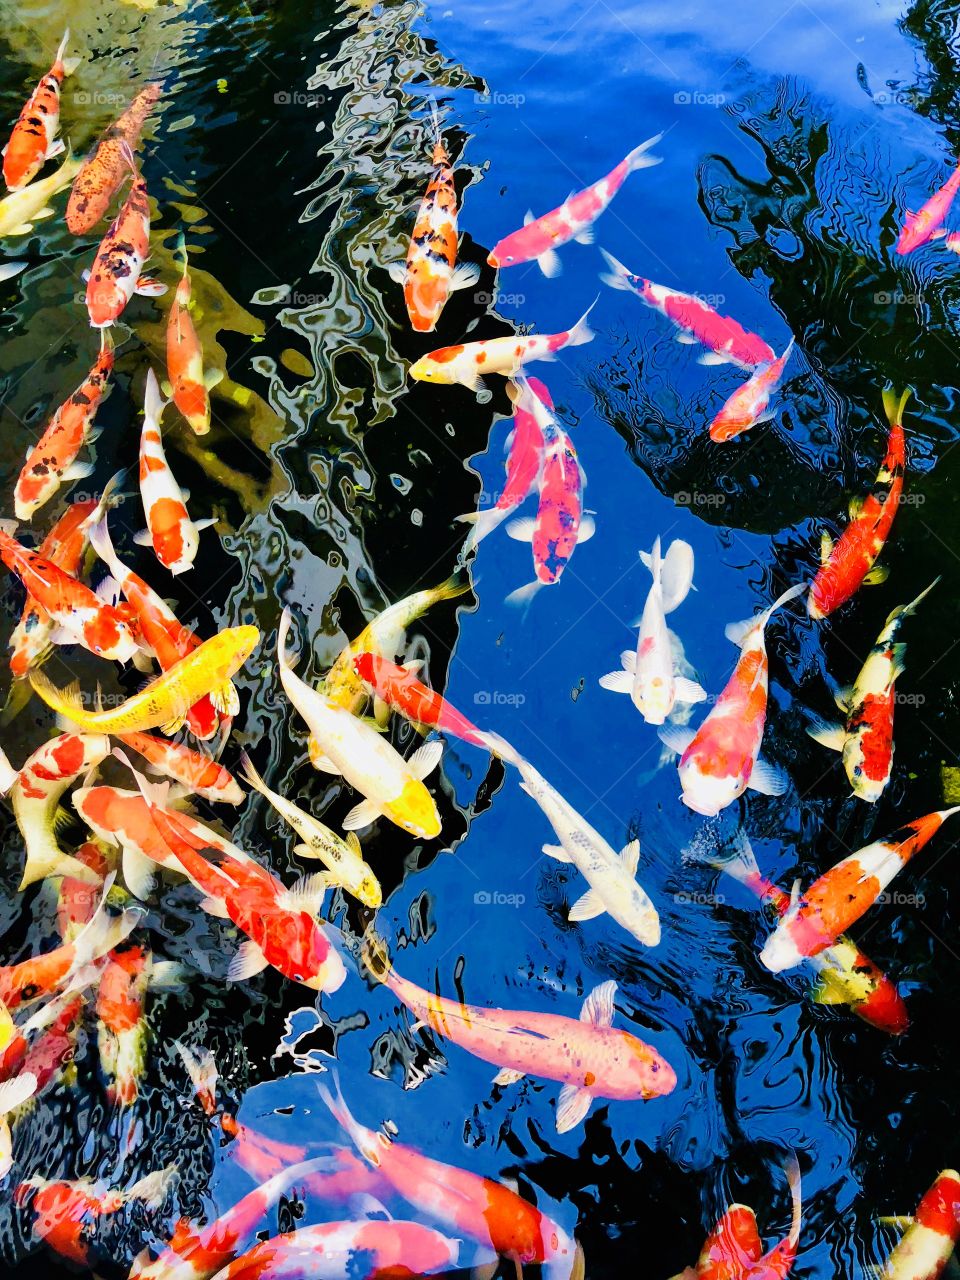 Not a painting. It’s a real pond with koi fish in it! 